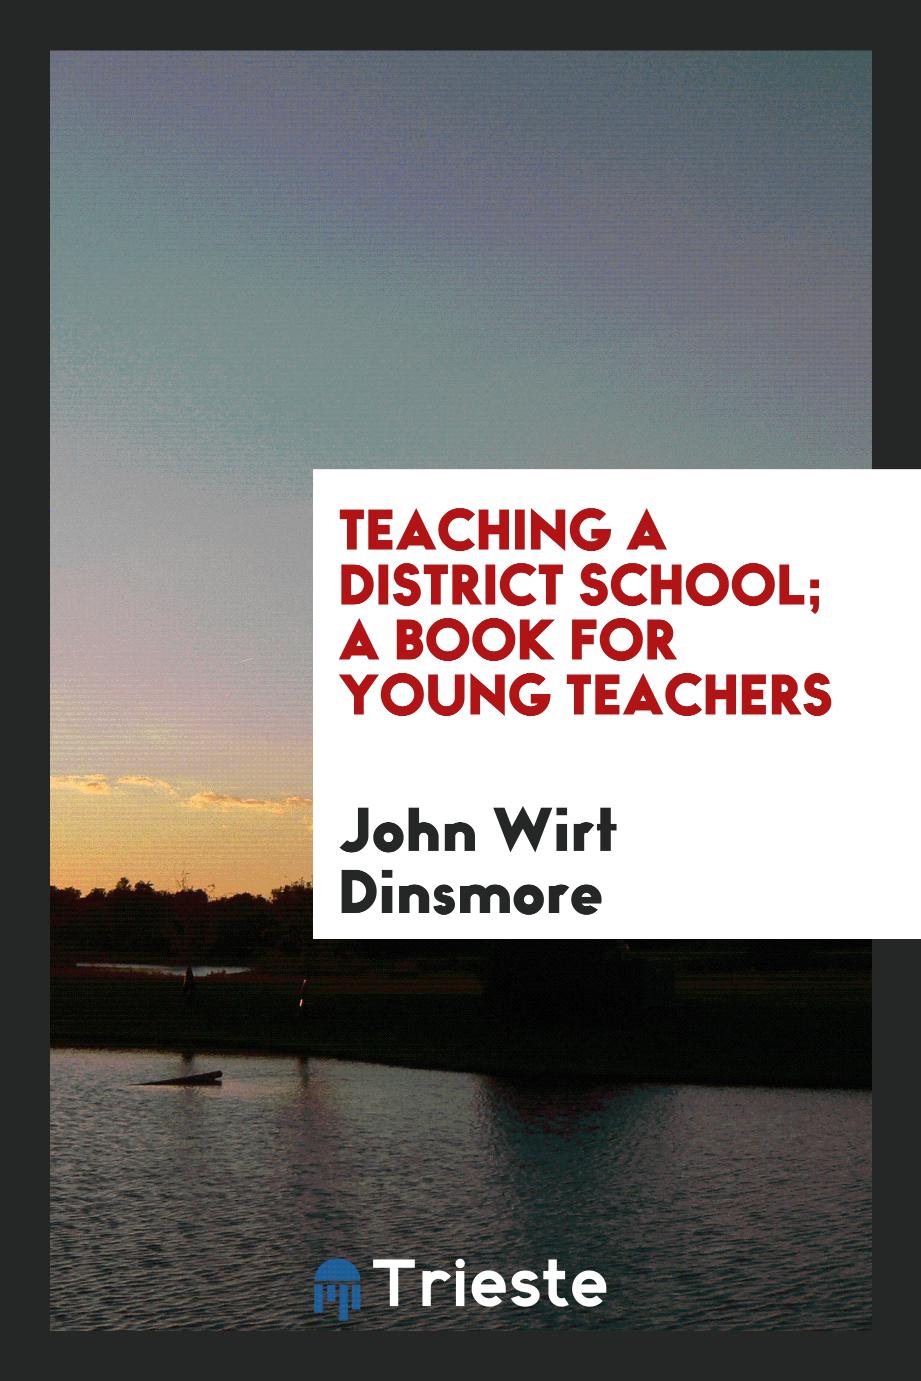 Teaching a district school; a book for young teachers